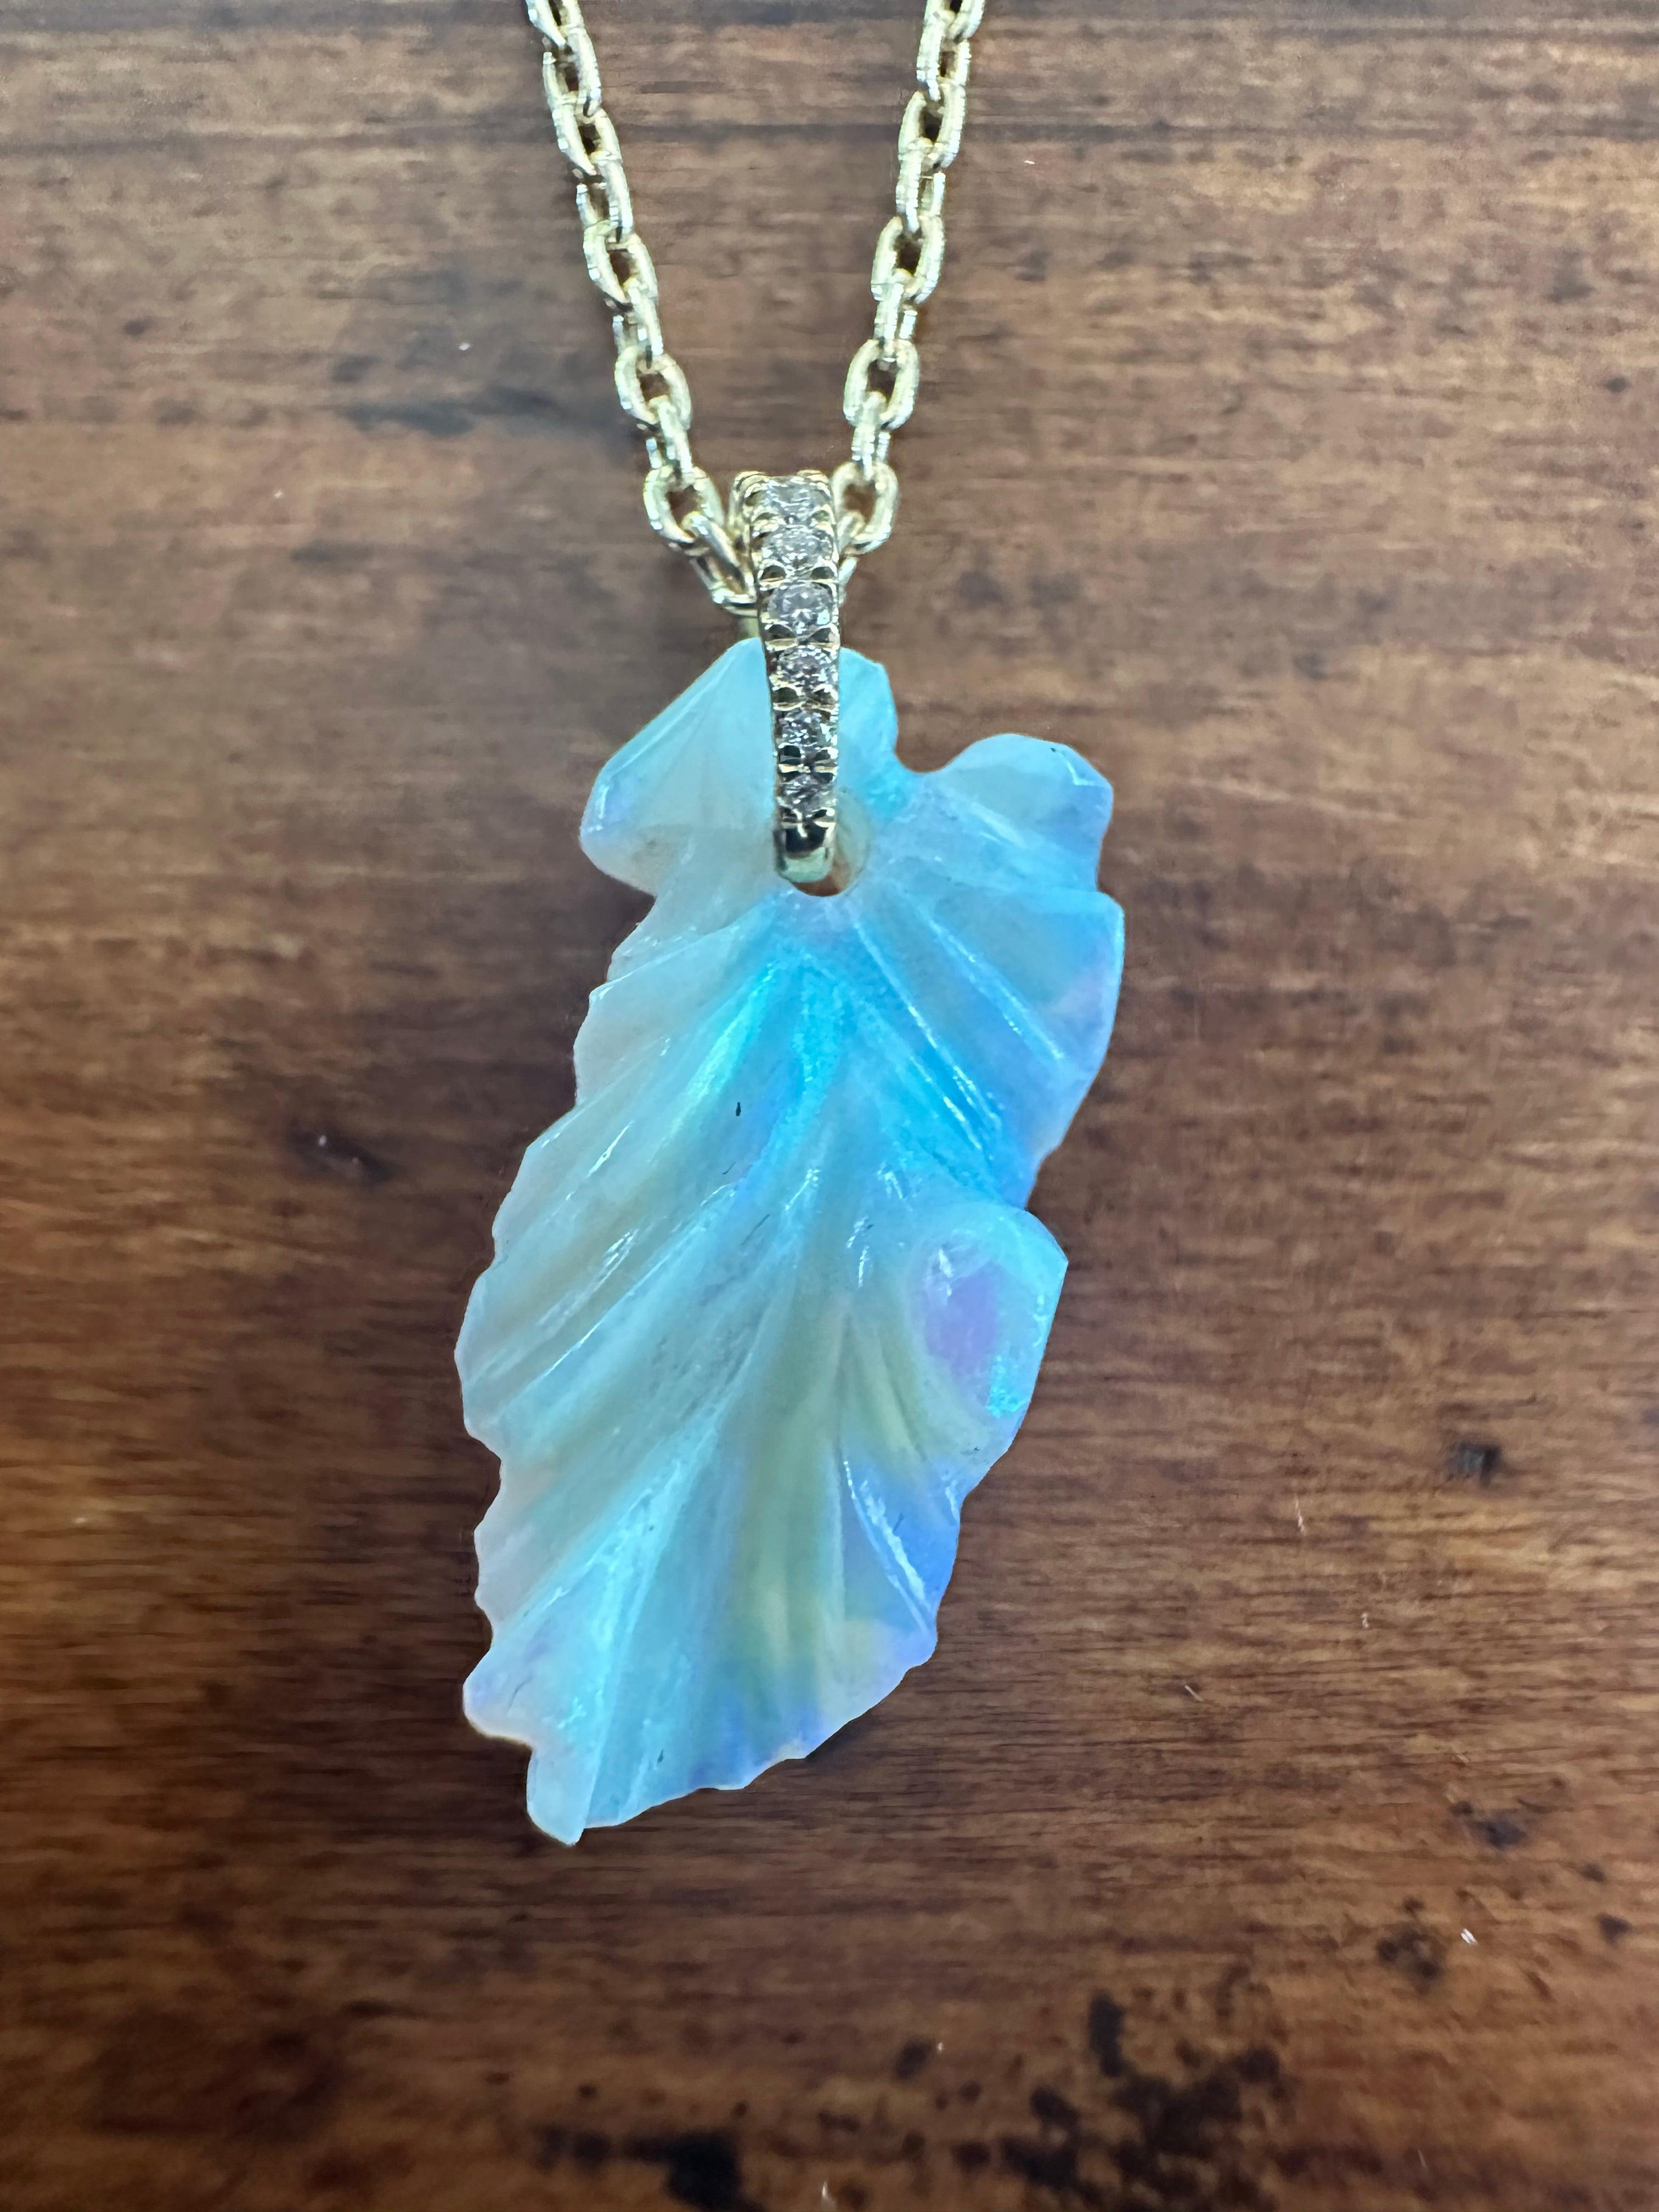 Handcrafted in 18K yellow gold, this beautiful leaf pendant necklace features a 6.57-carat natural fine green-blue tinted carved opal accented with eight round diamonds totaling 0.10 carats. The necklace measures 18 inches. 